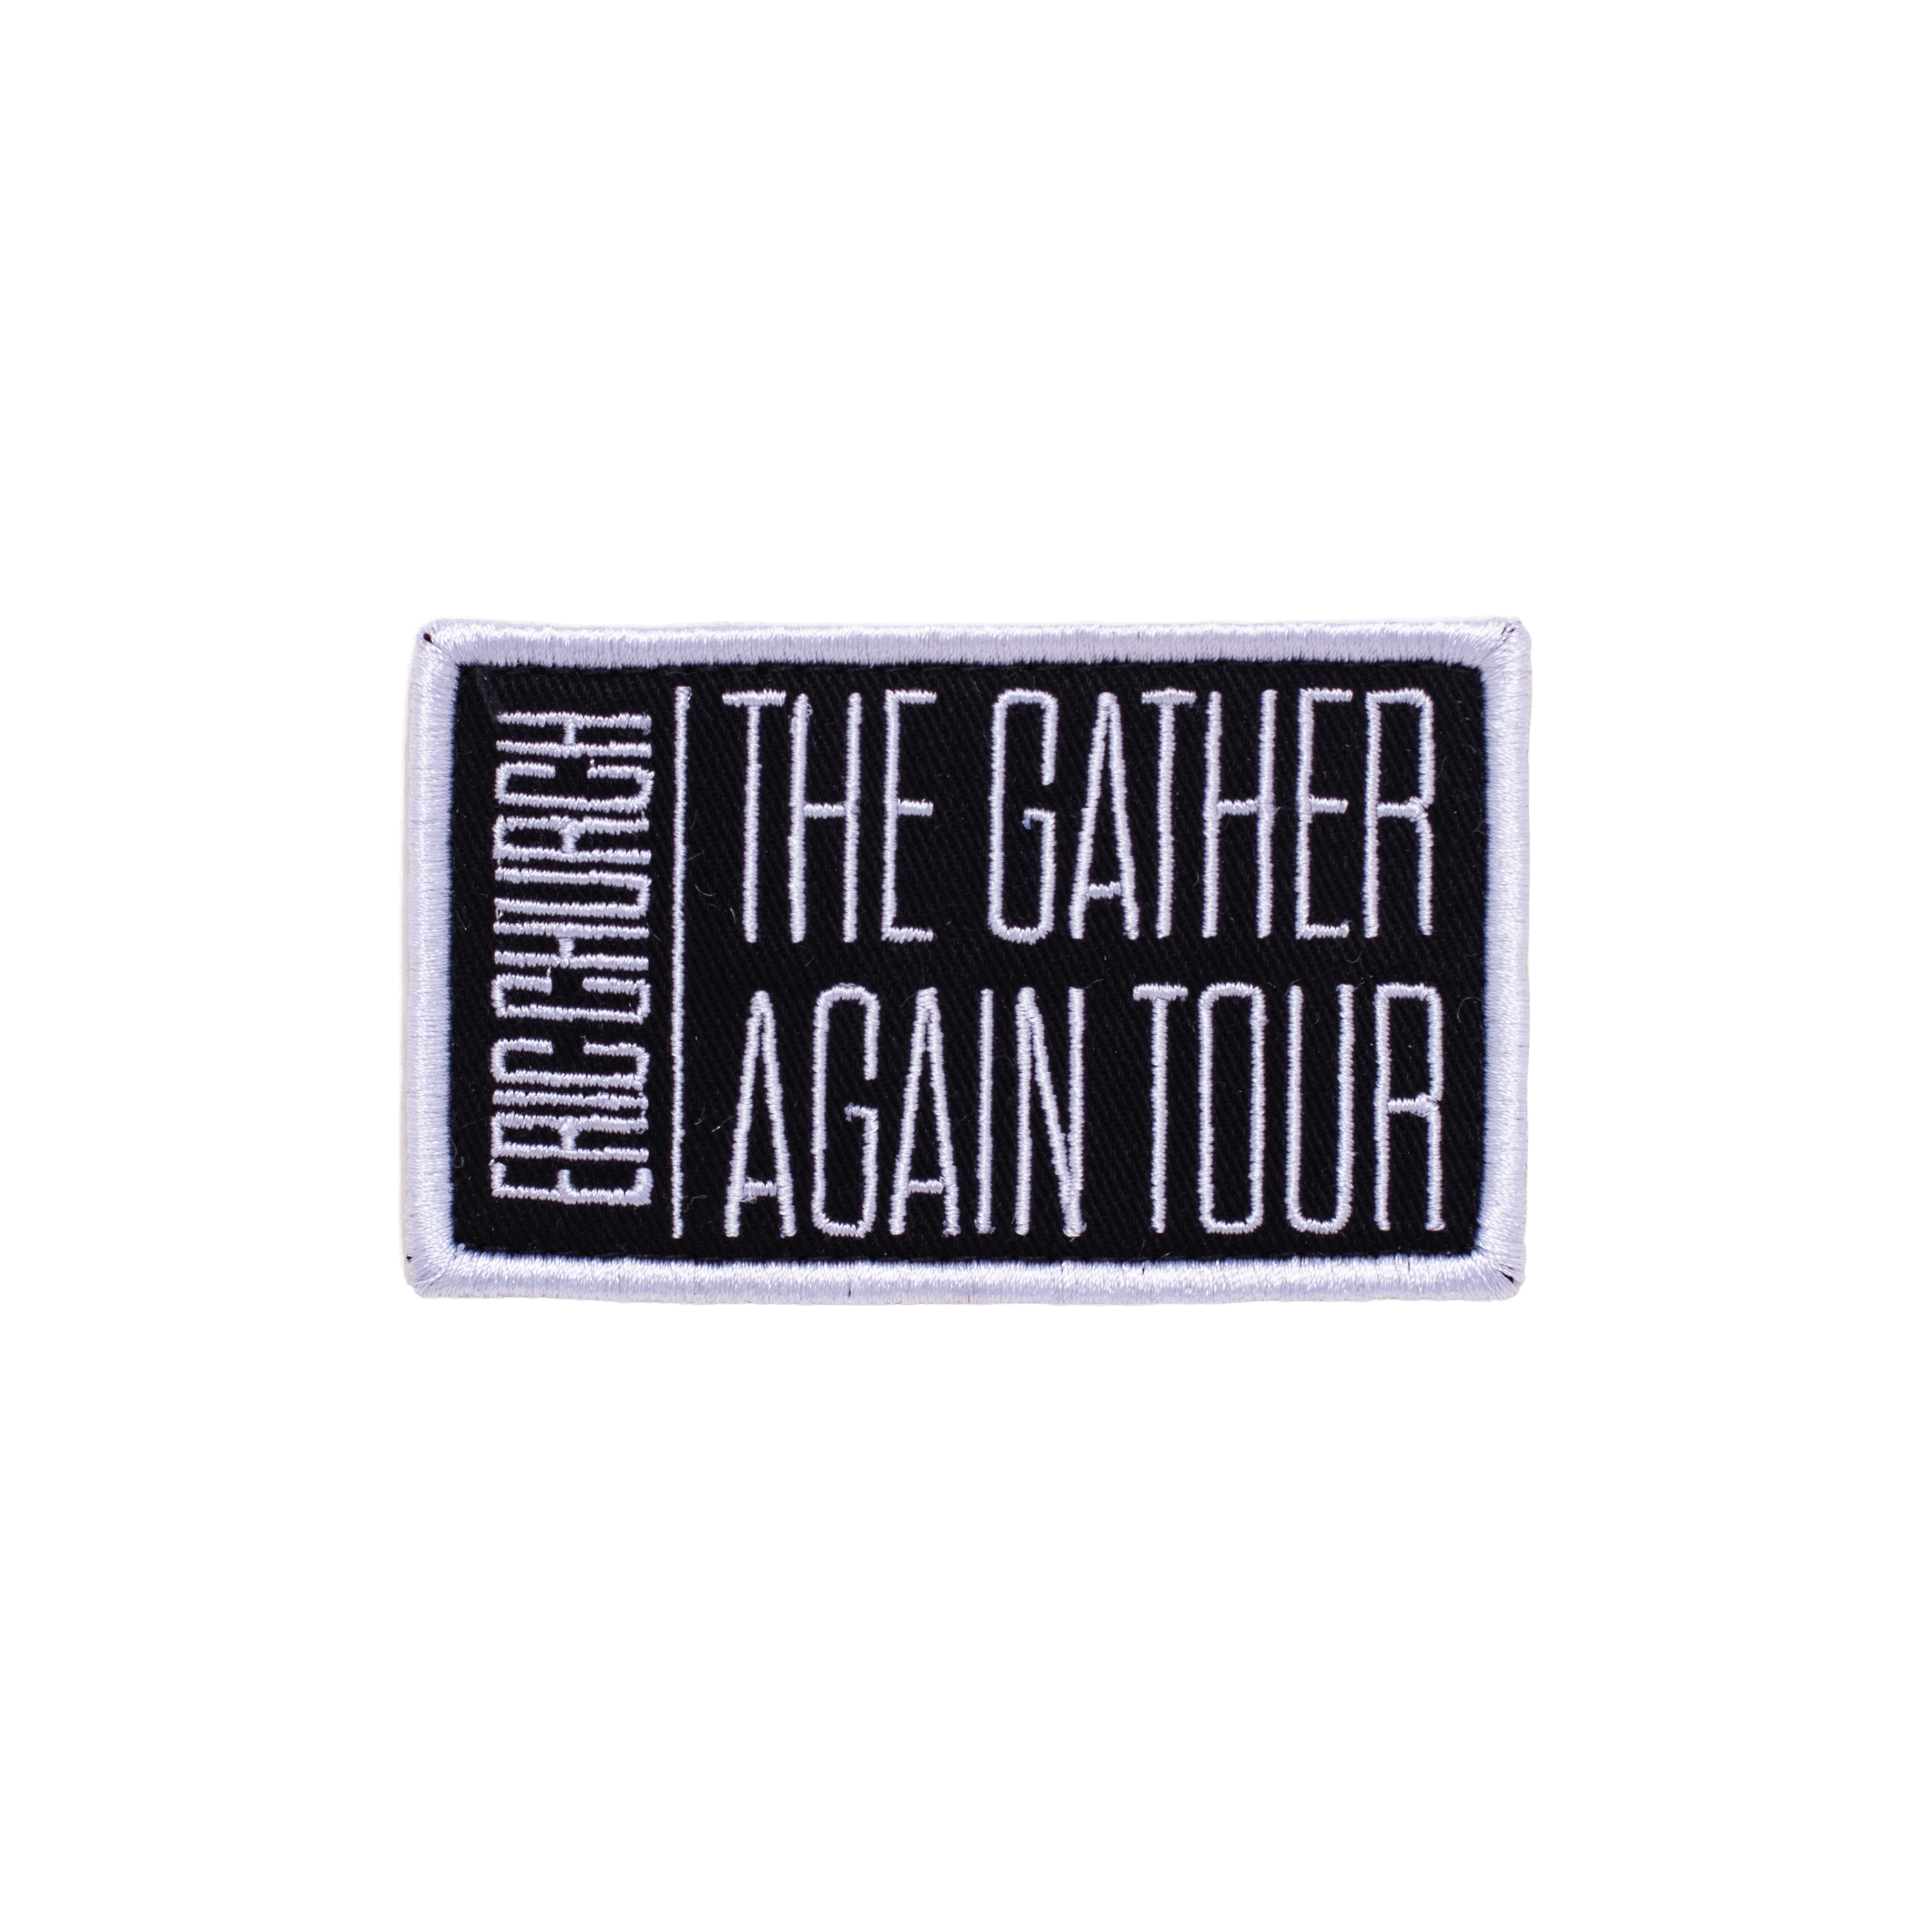 The Gather Again Tour Velcro Patch